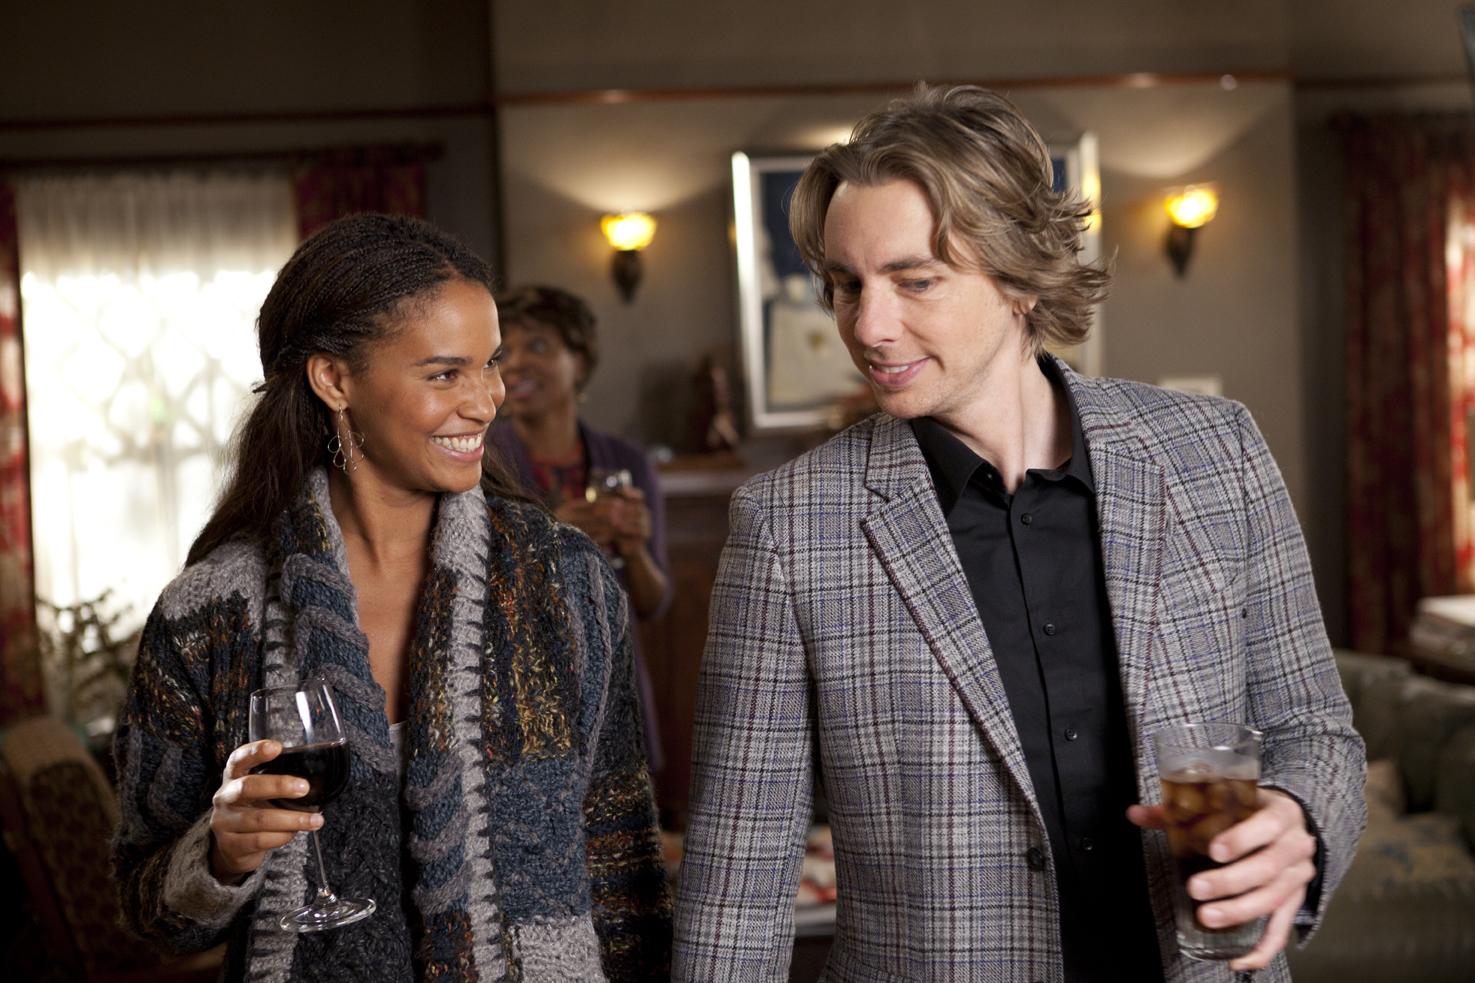 What ‘Parenthood’ Taught Me About Interracial Relationships